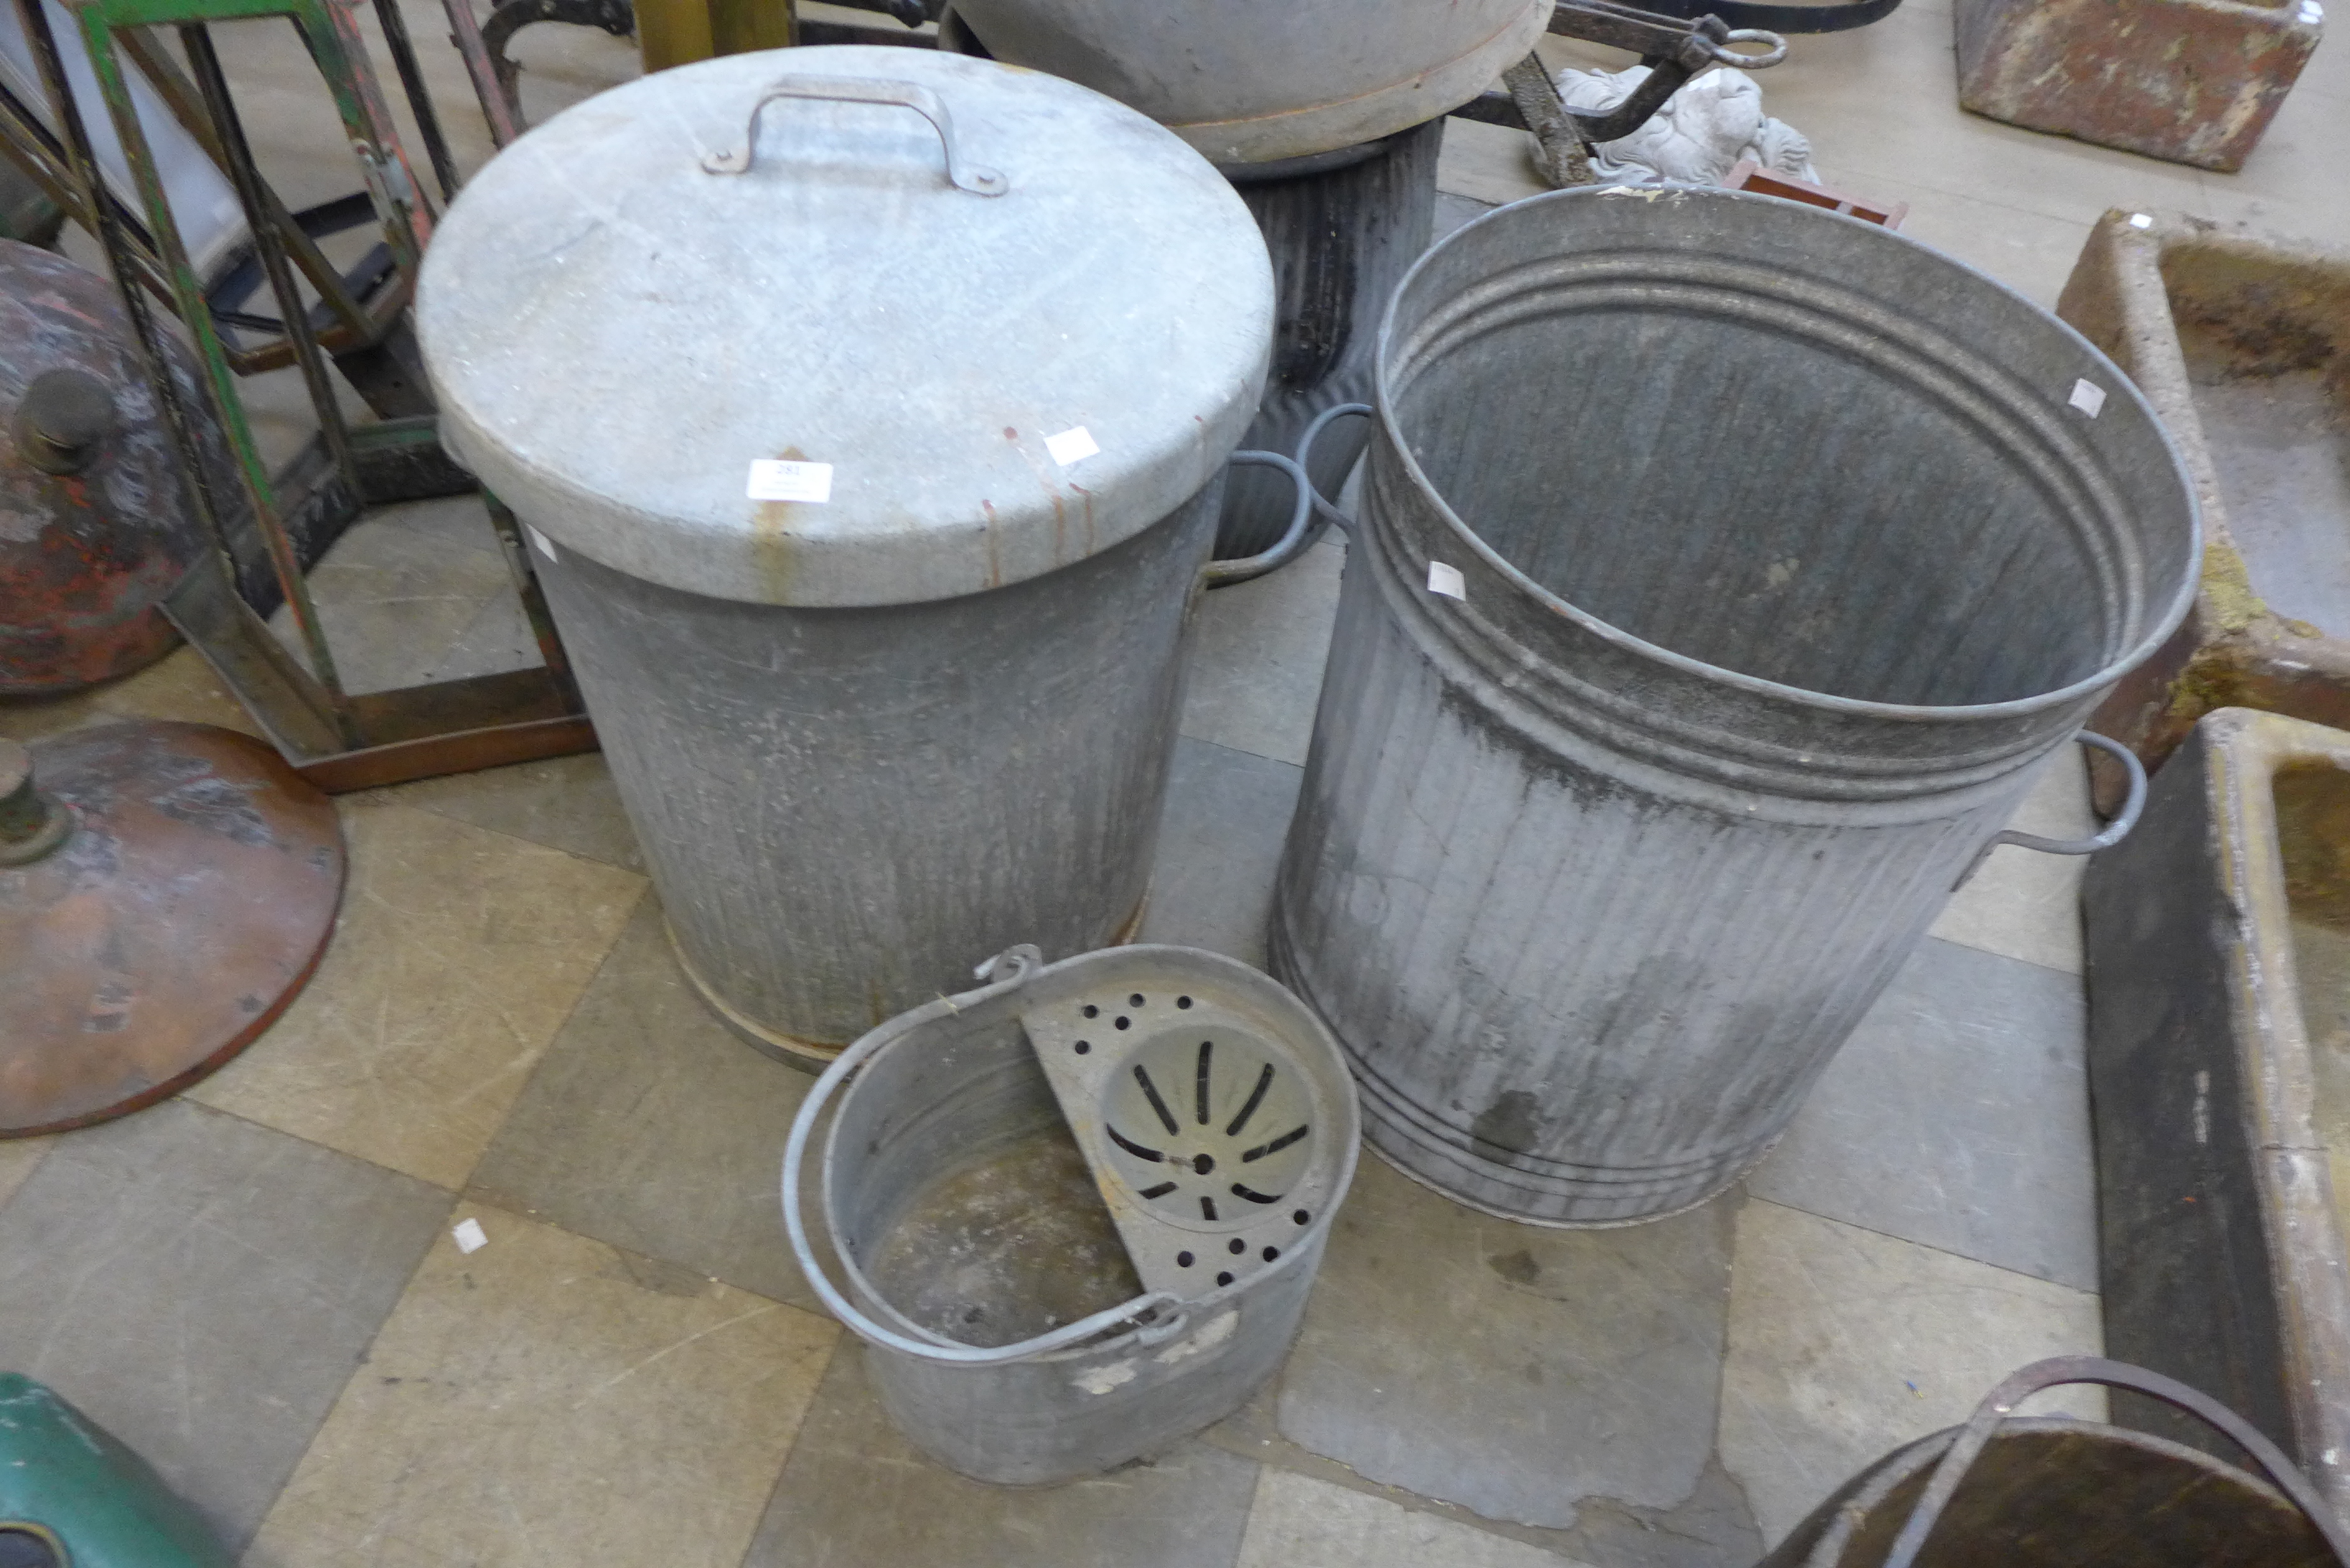 Two galvanised bins and a mop bucket